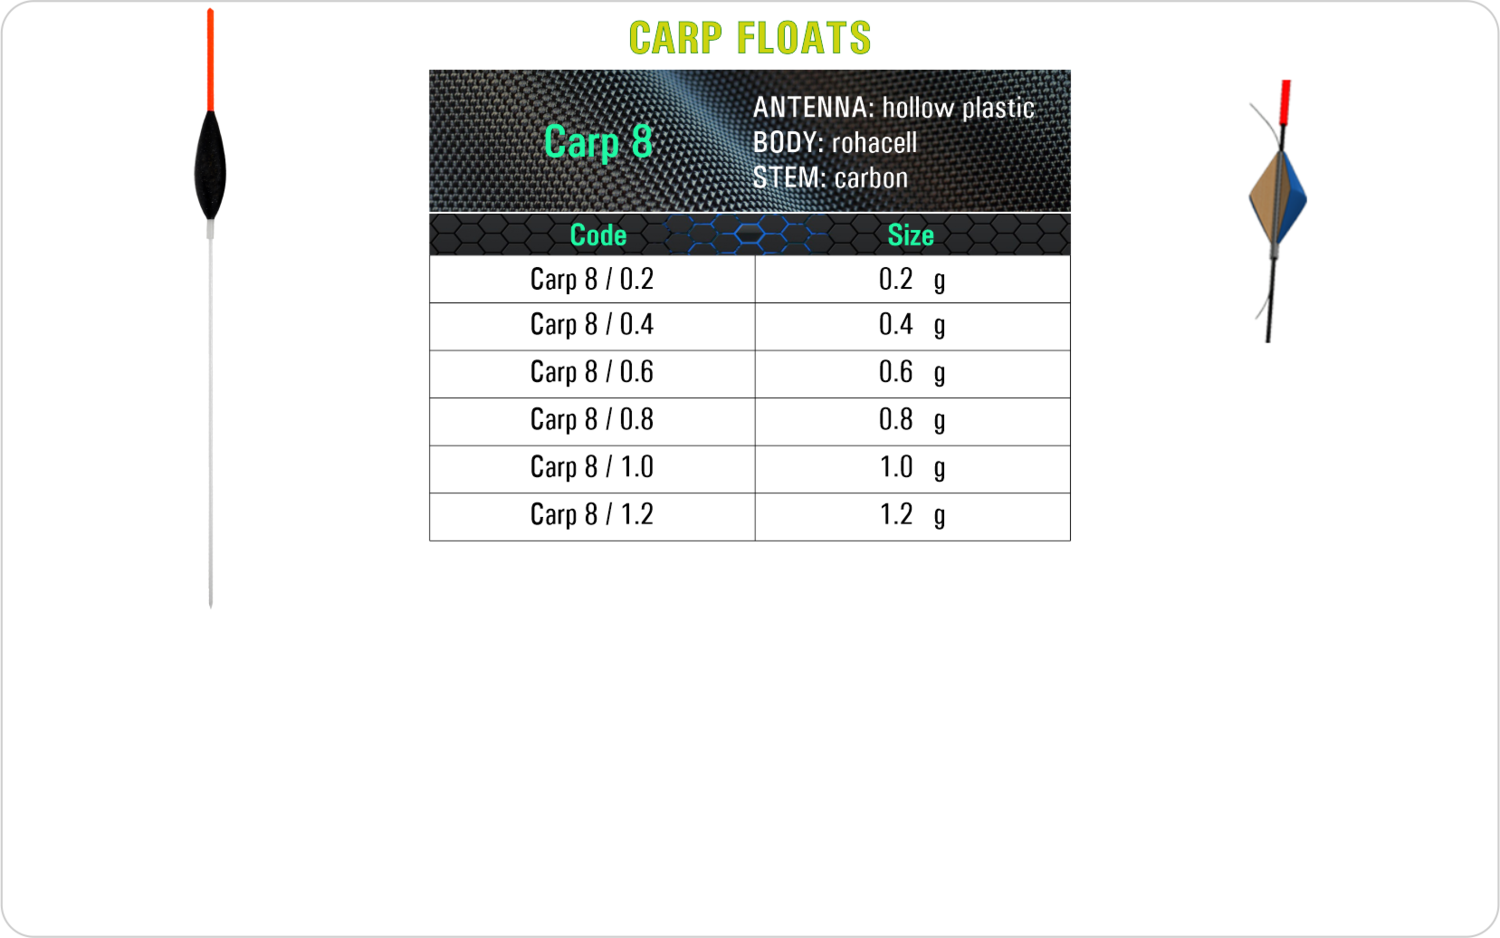 SF Carp 8 Carp float model and table containing an additional information about this float with different codes, sizes, types of the body, the stem and the antenna of the float.